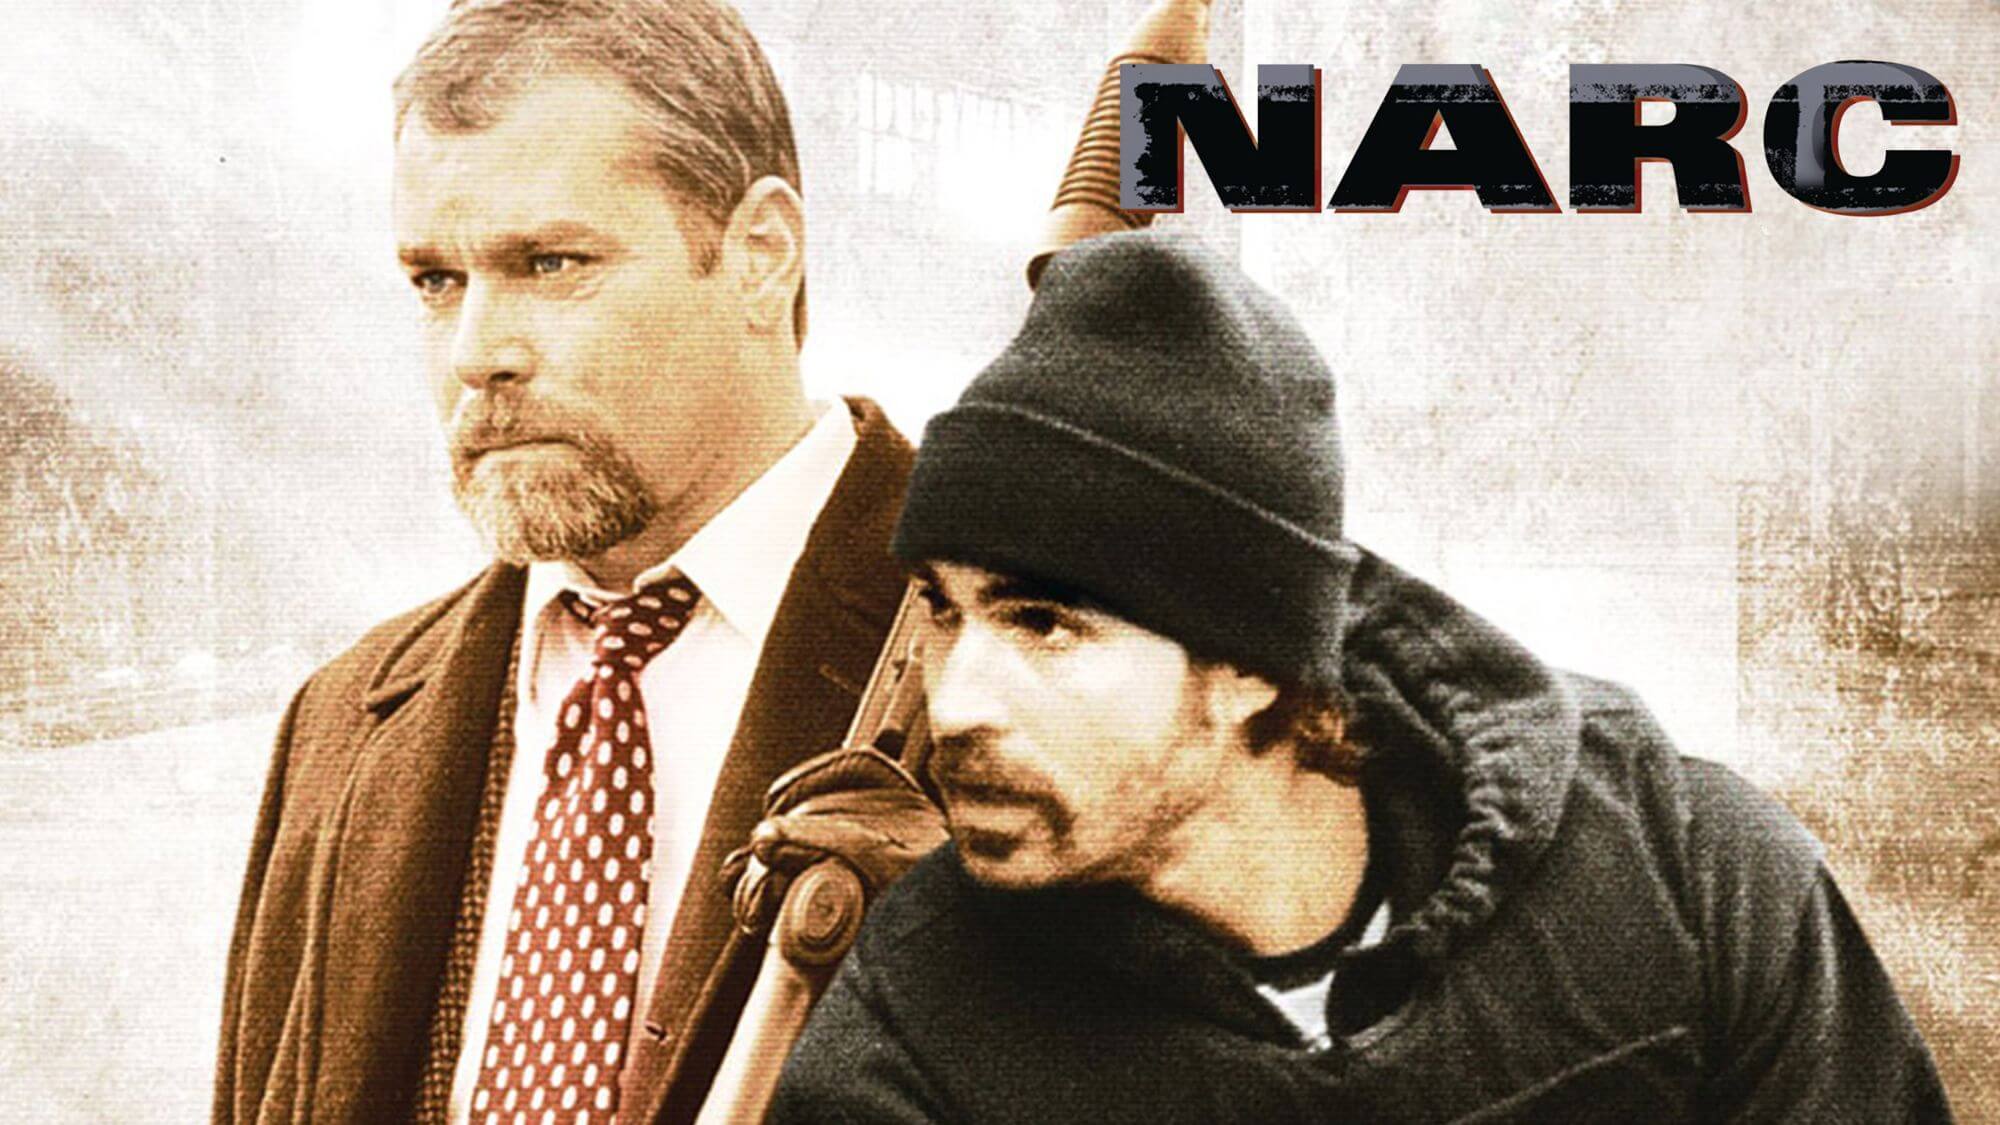 38-facts-about-the-movie-narc